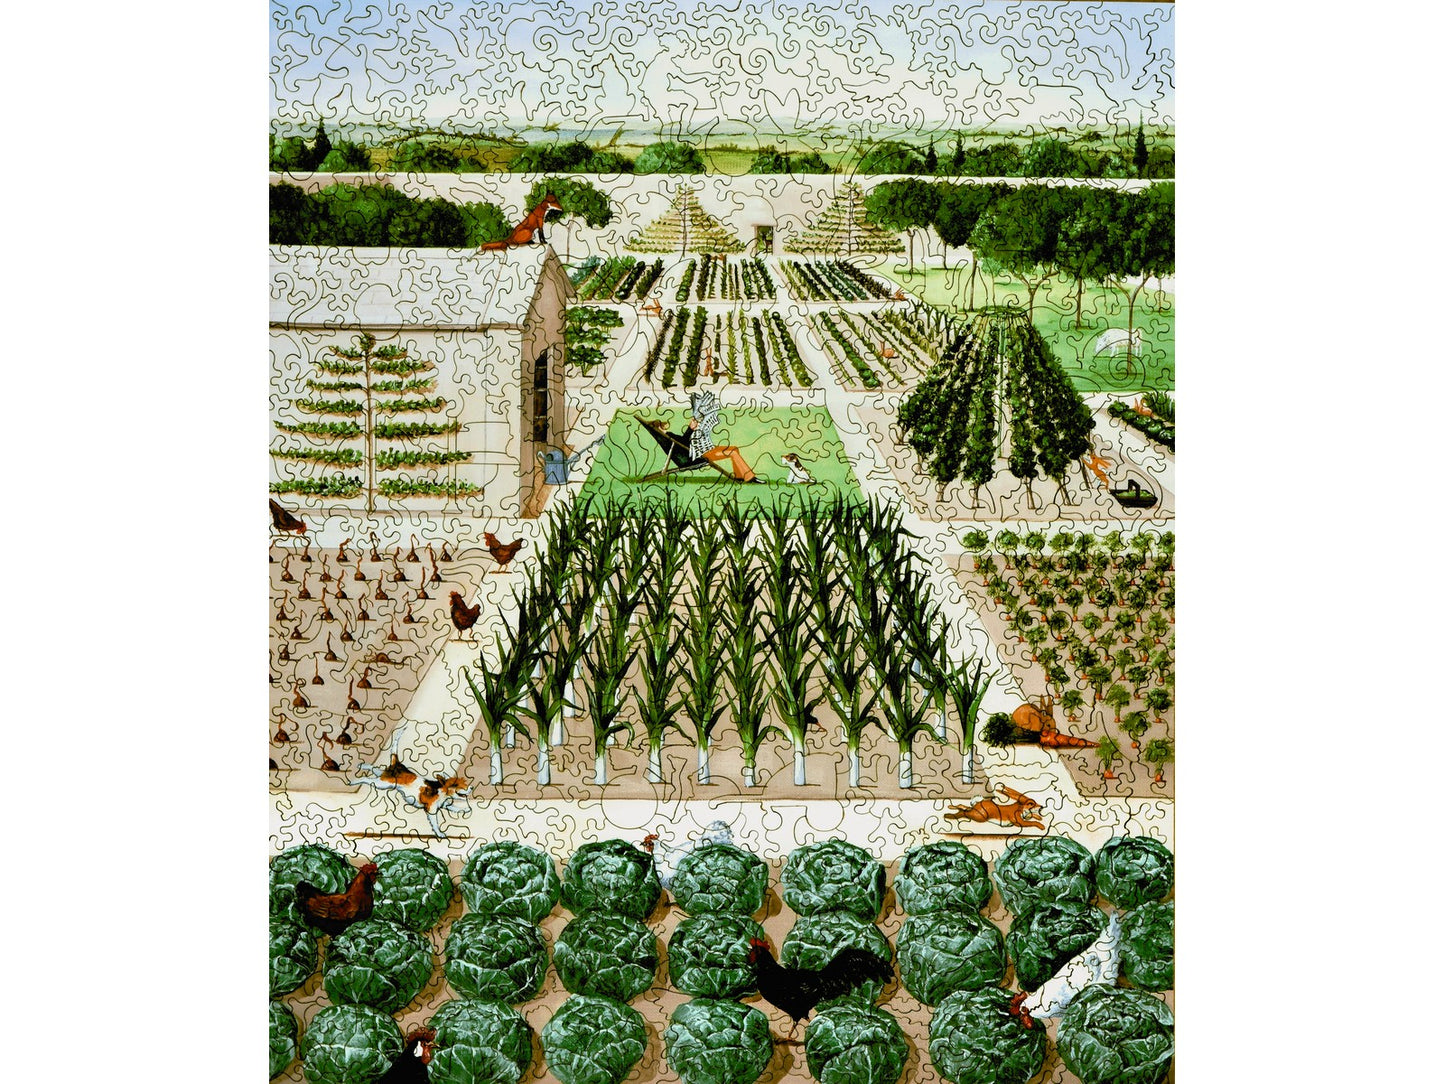 The front of the puzzle, The Good Life, which shows a person relaxing in a garden.